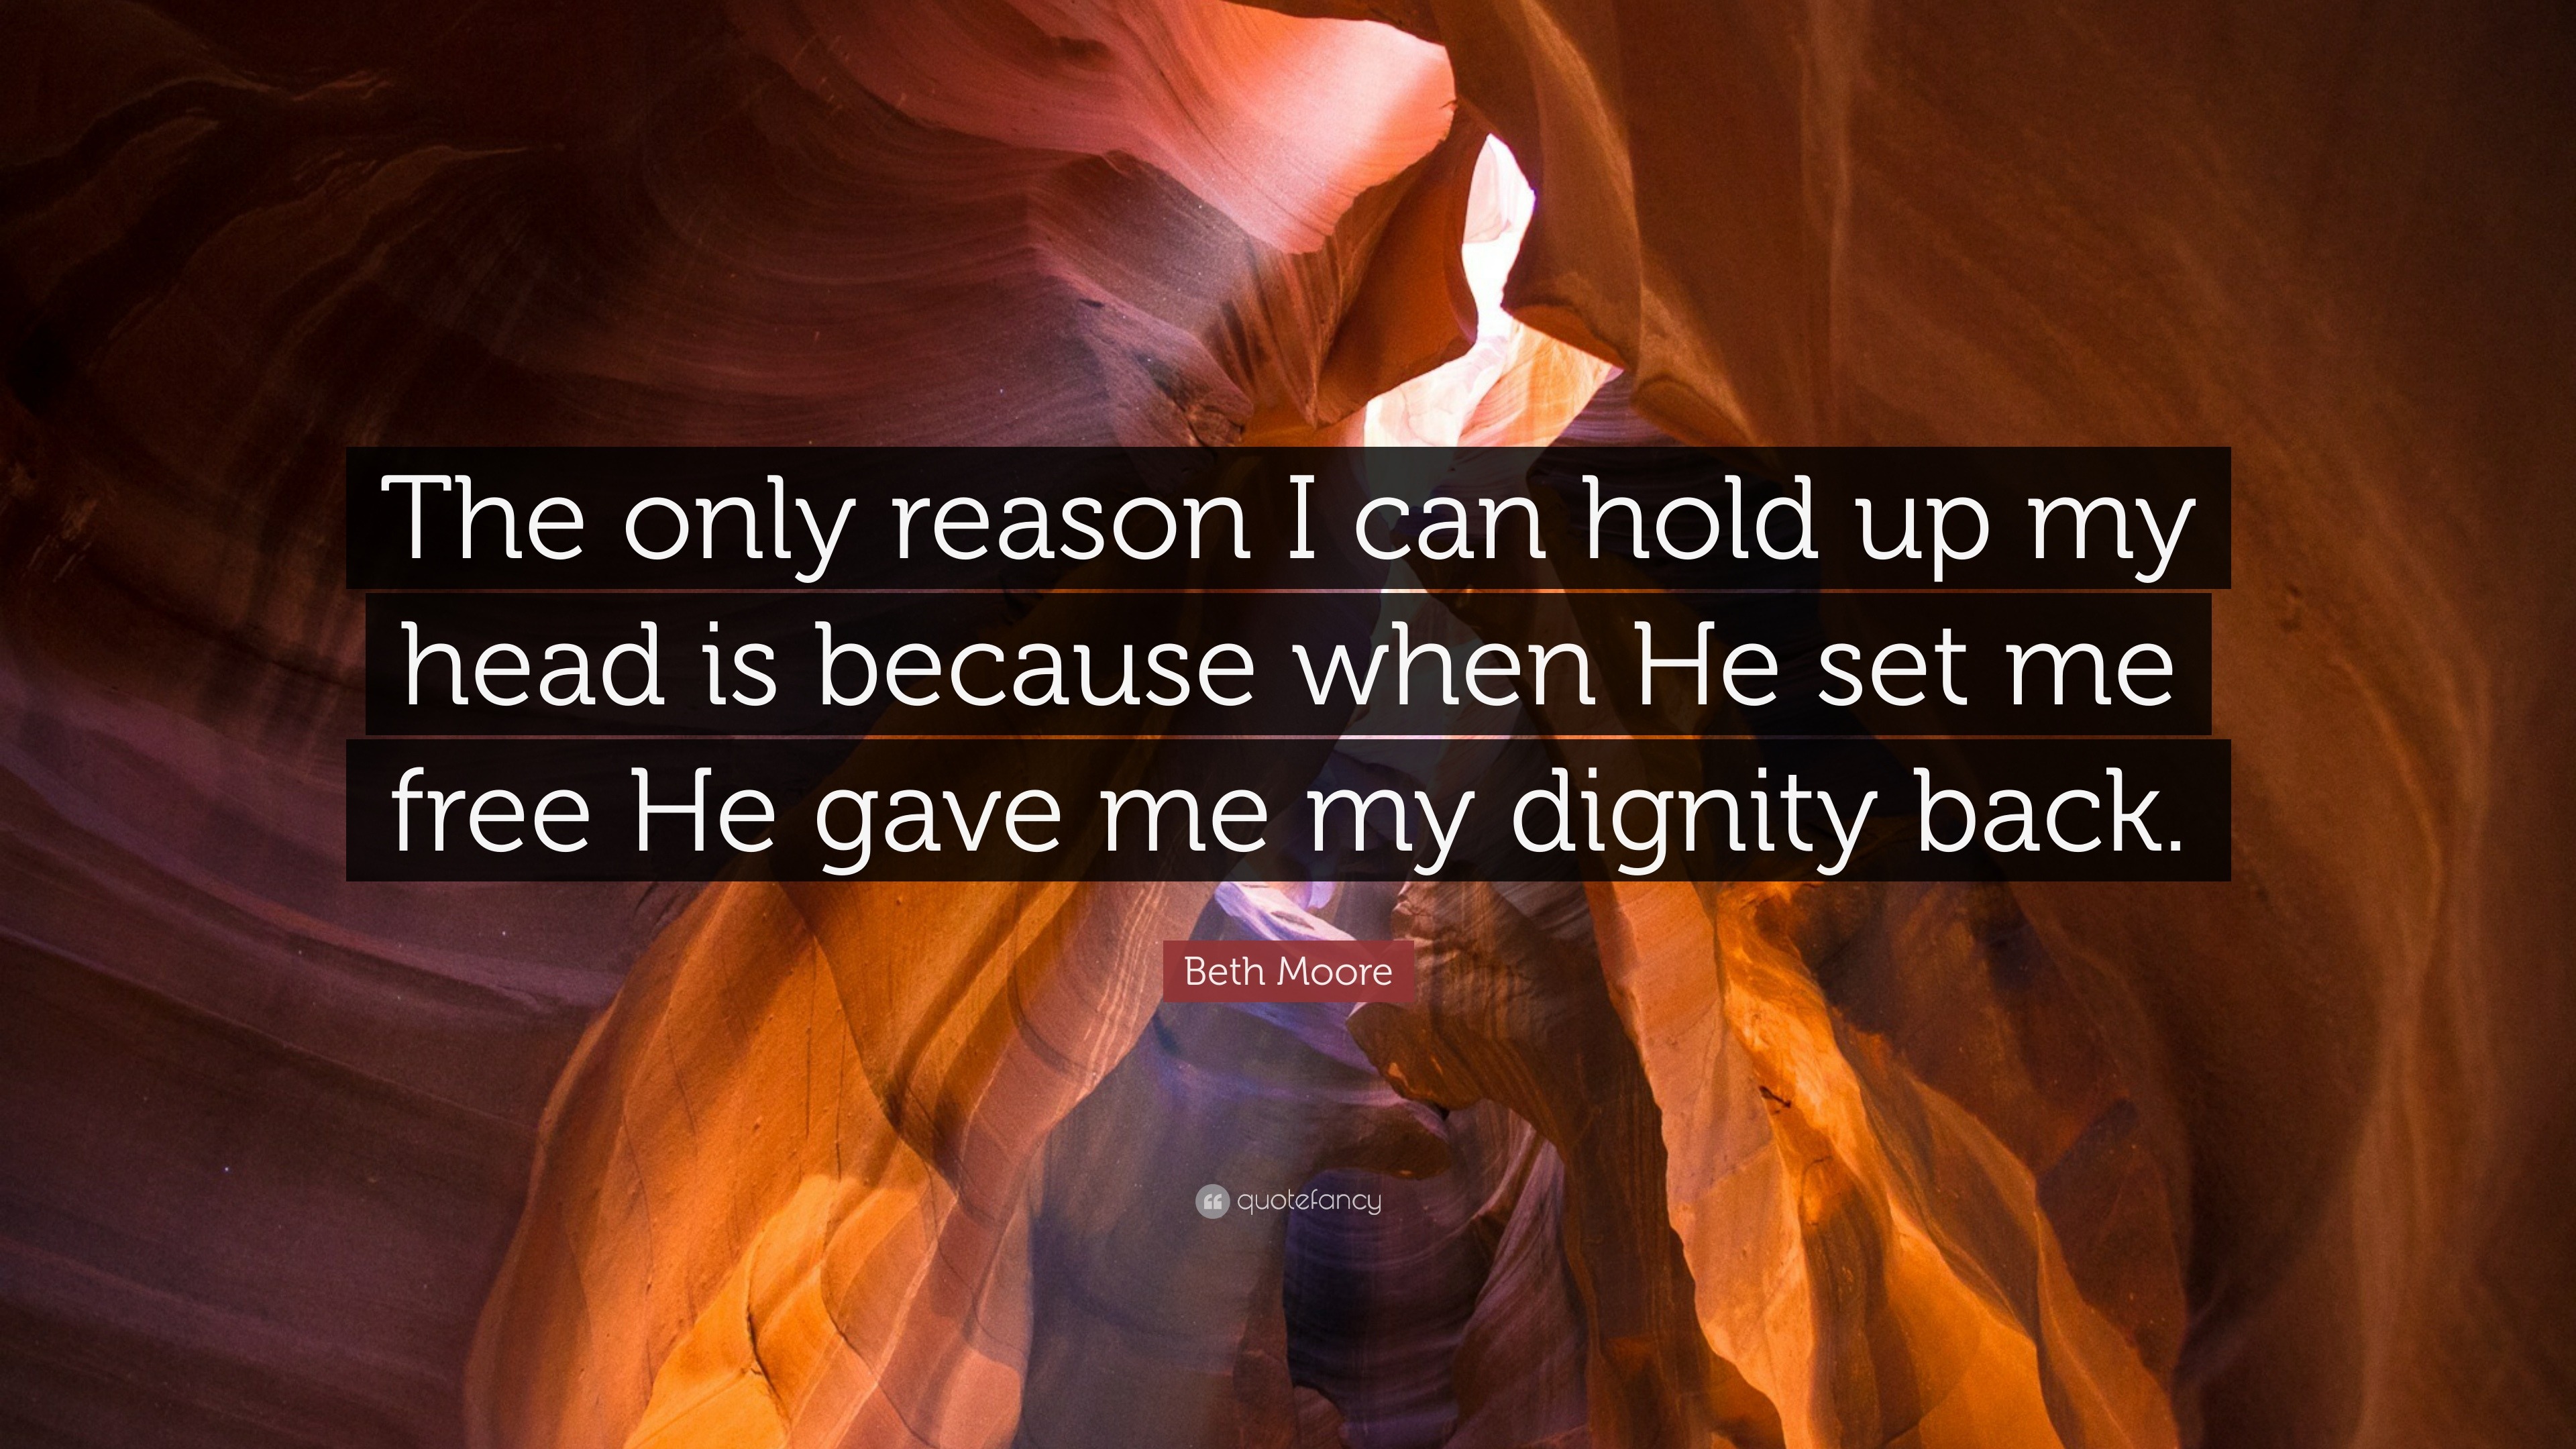 Download Beth Moore Quote: "The only reason I can hold up my head ...